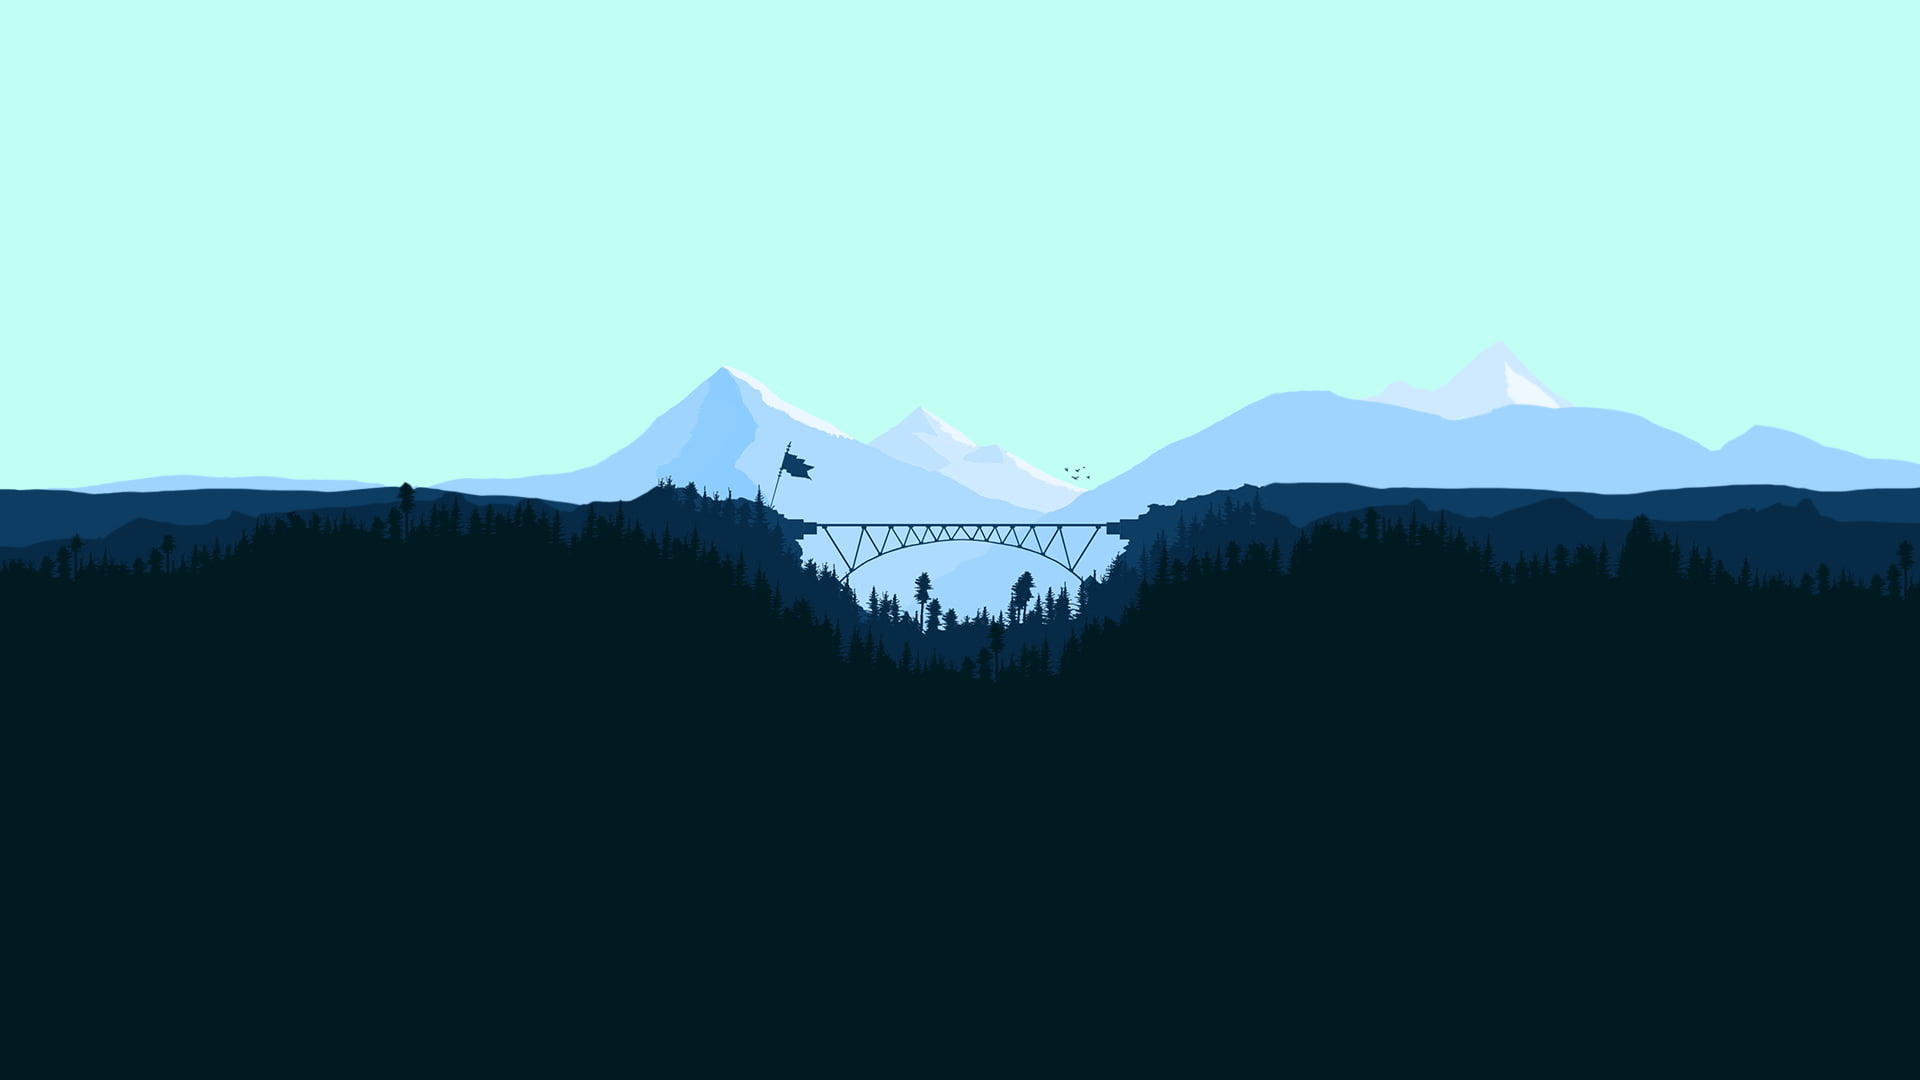 Icy mountain animated illustration, wallpaper of mountain during daytime